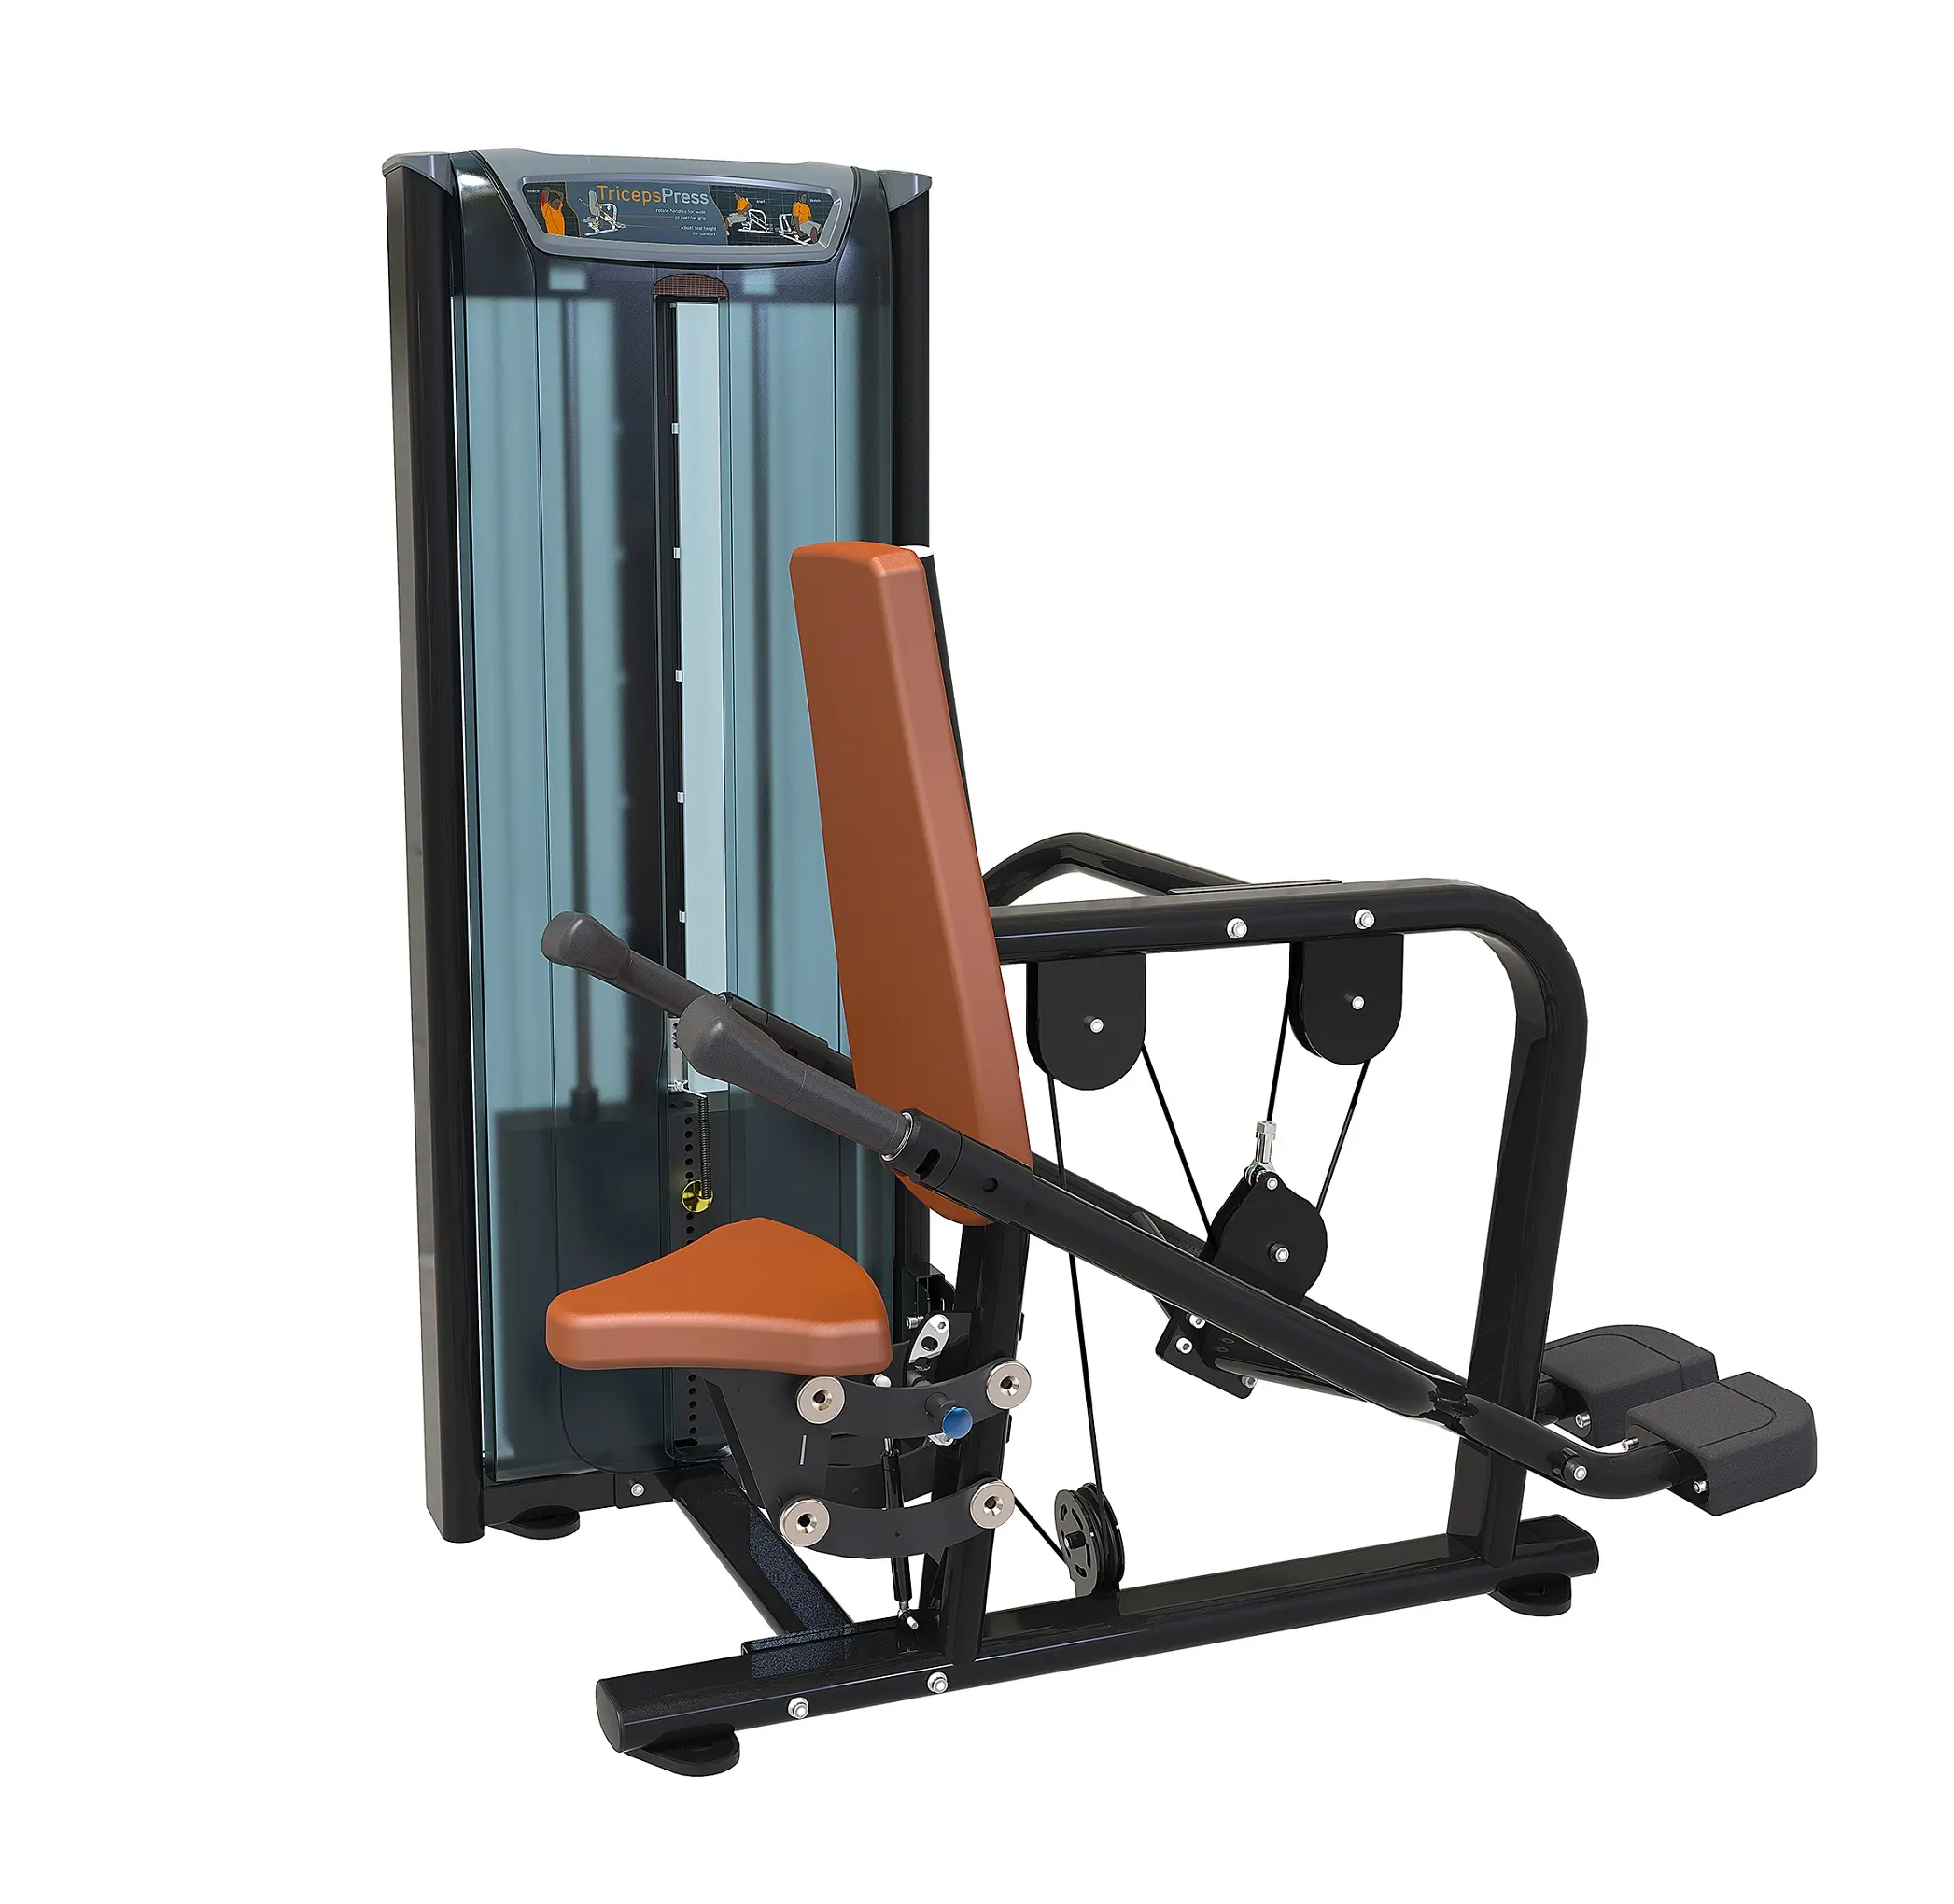 commercial use gym fitness equipment matrix versa triceps press with 80kg weight stack with translucency panel Lanbo brand